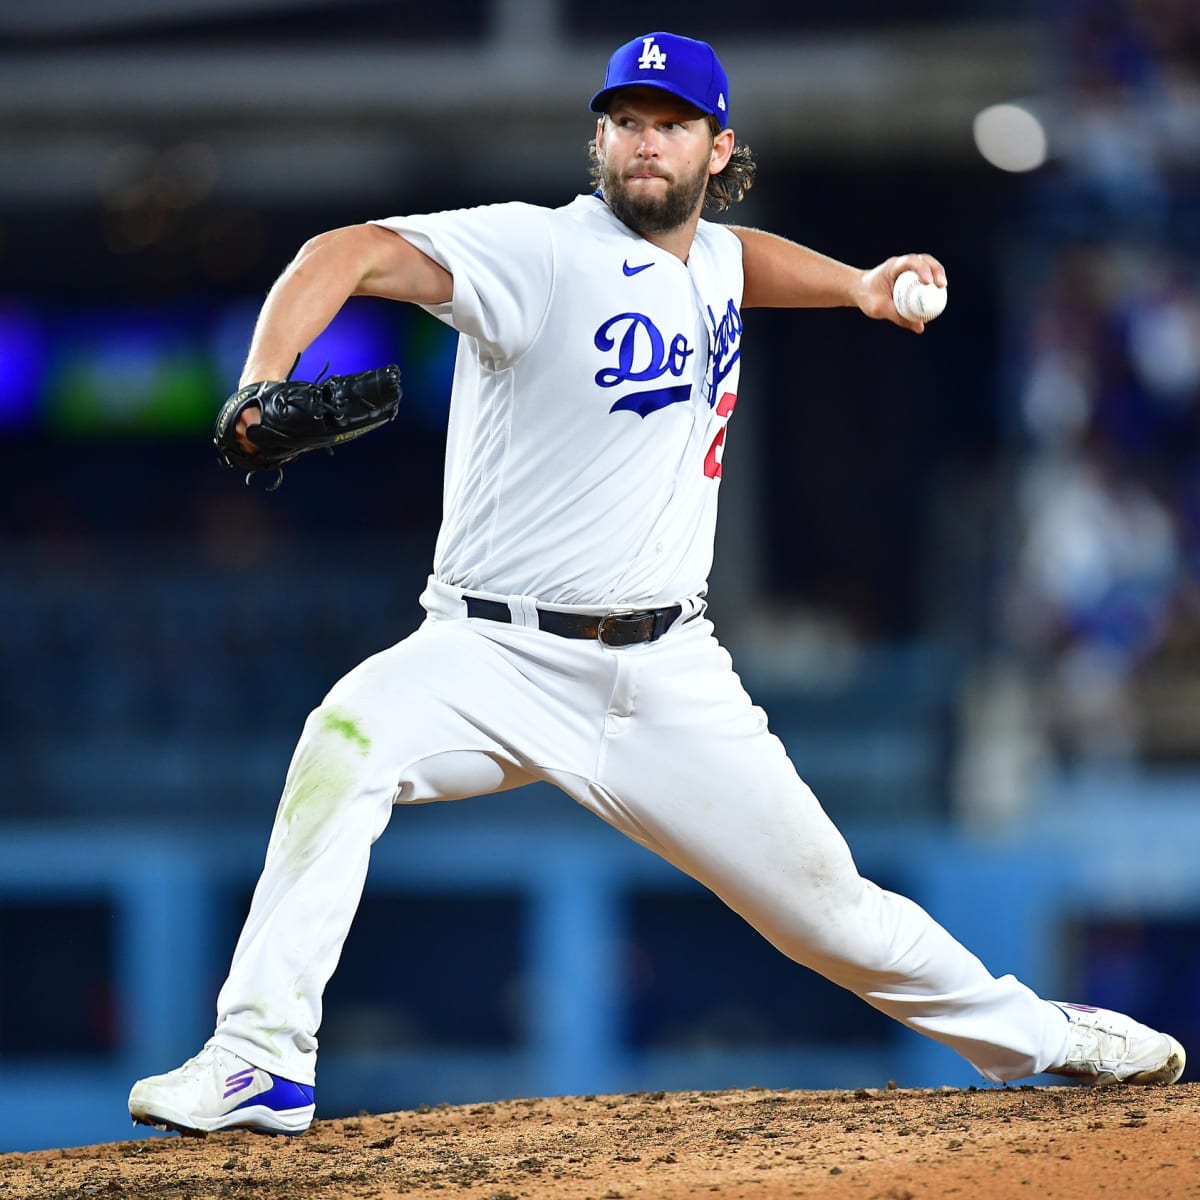 Dodgers' Kershaw pitches a win for the love of reading – Daily News